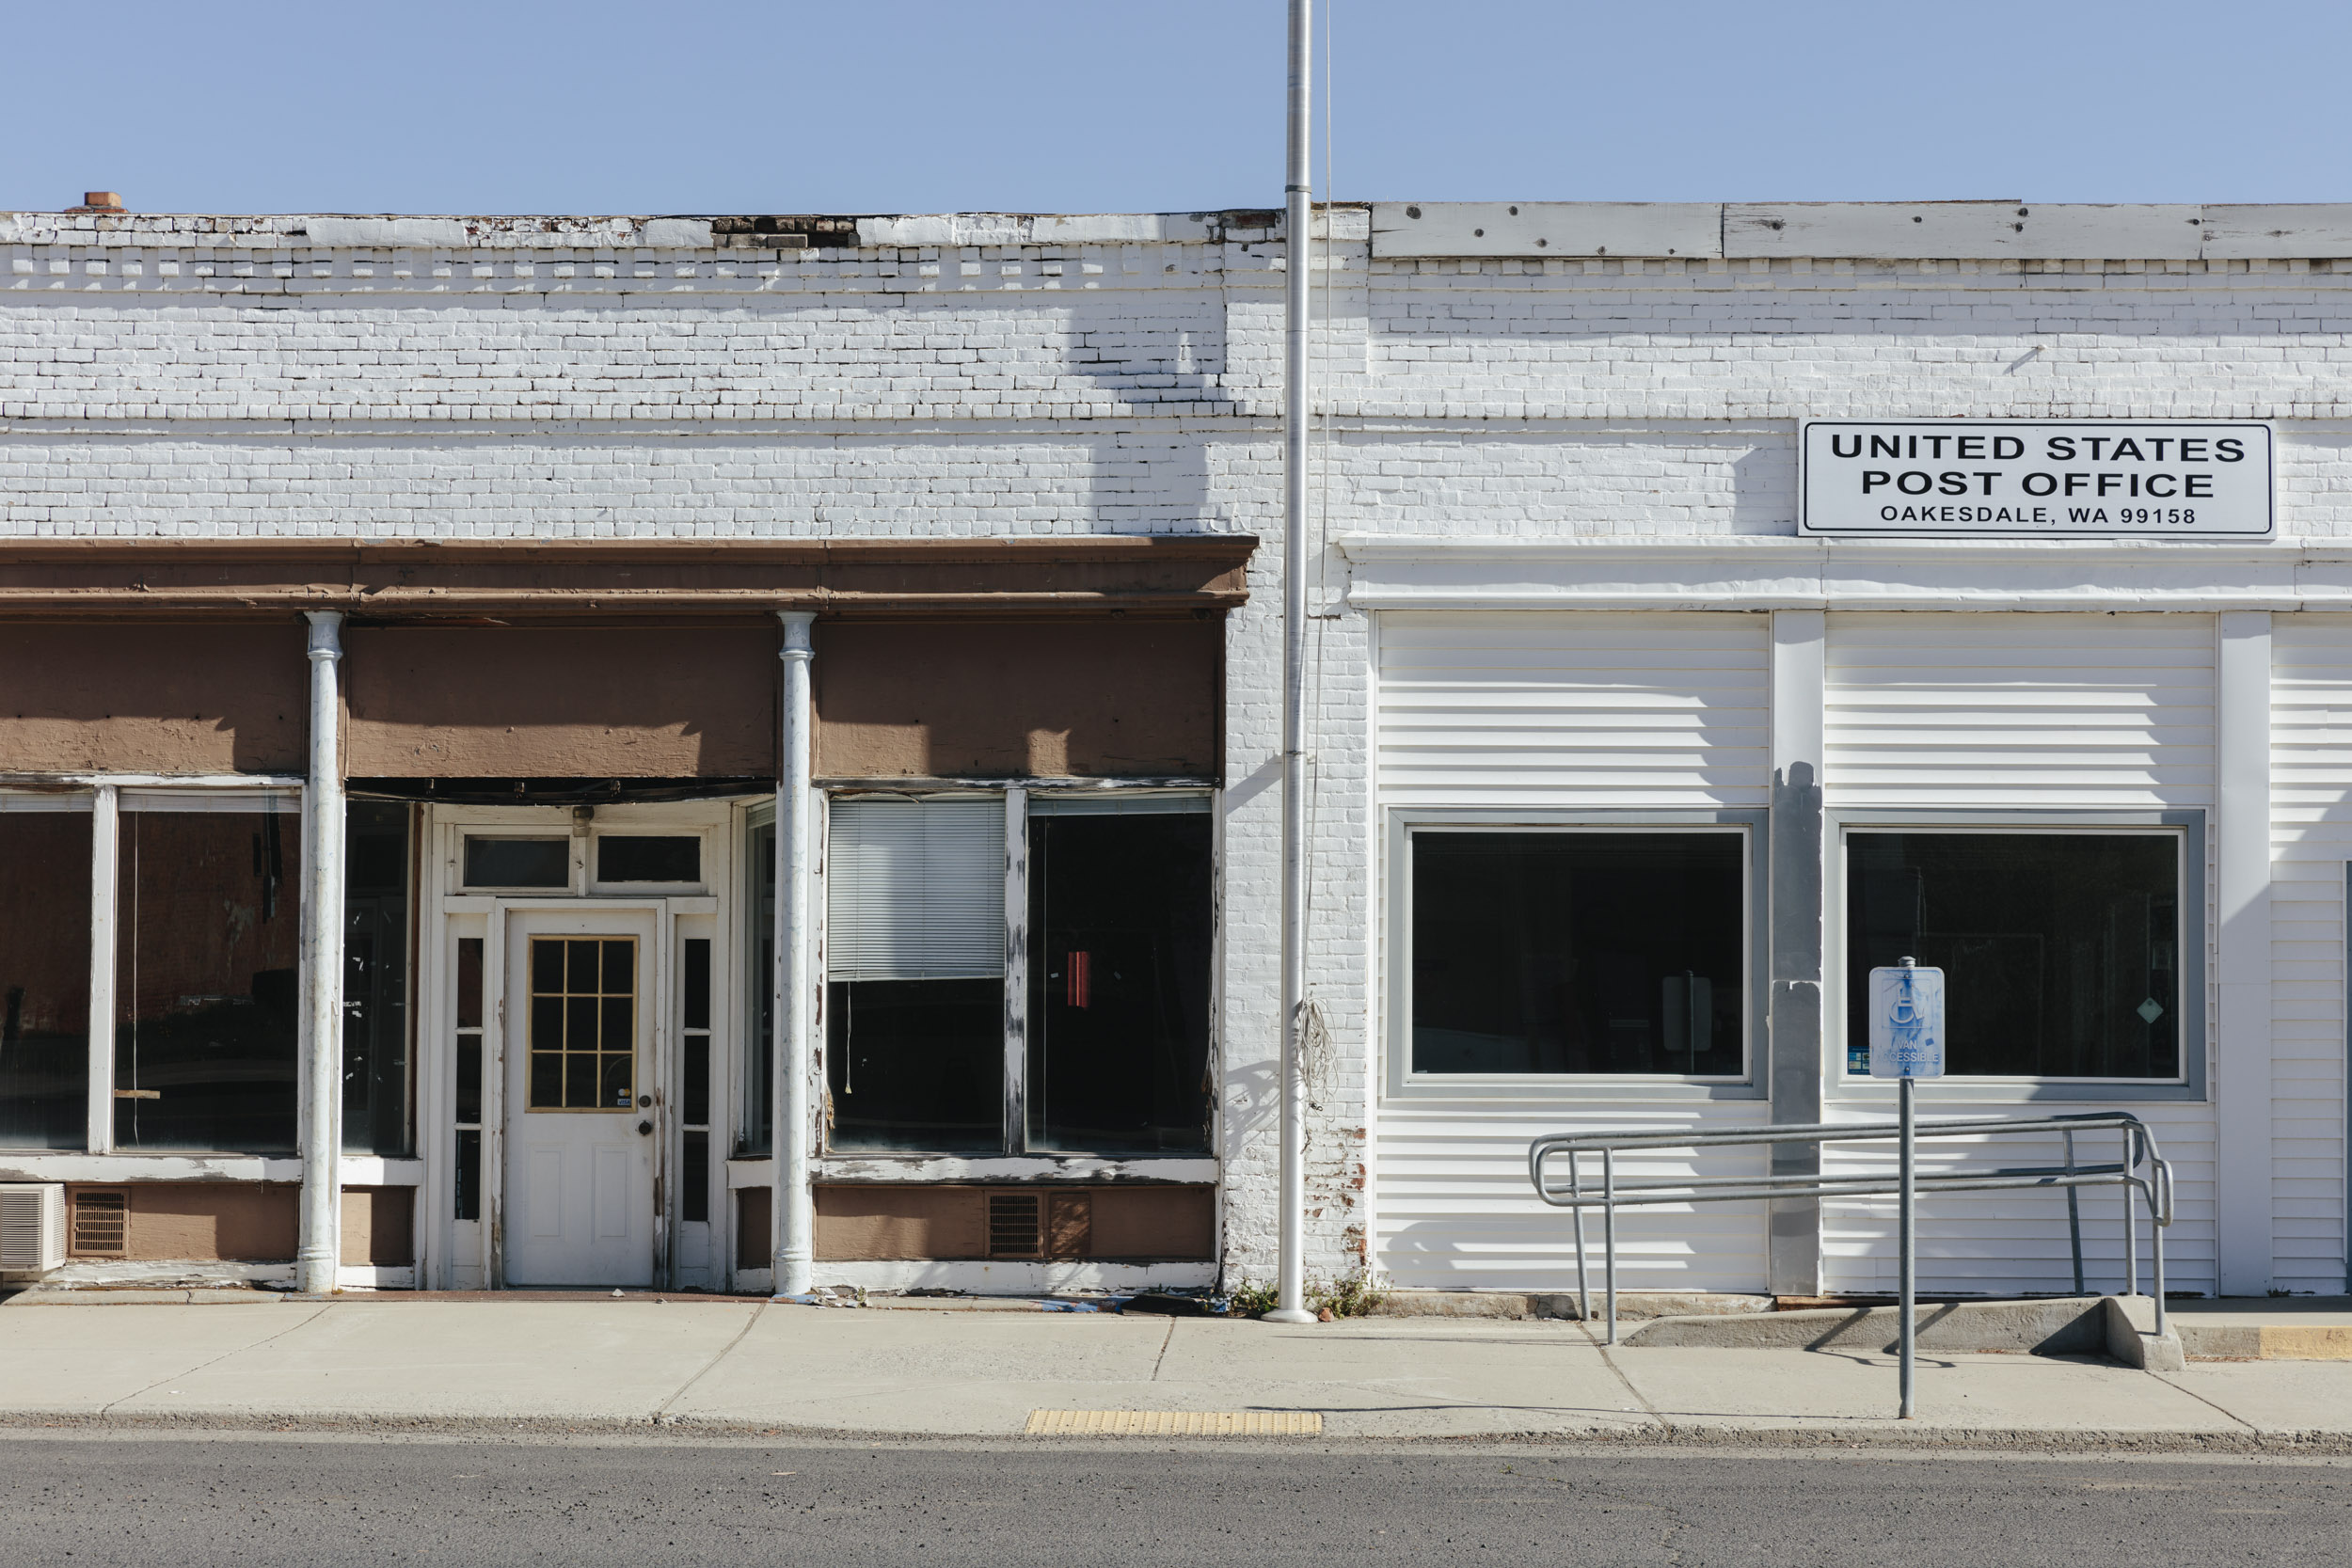 Post Office, Oakesdale, WA, 2021